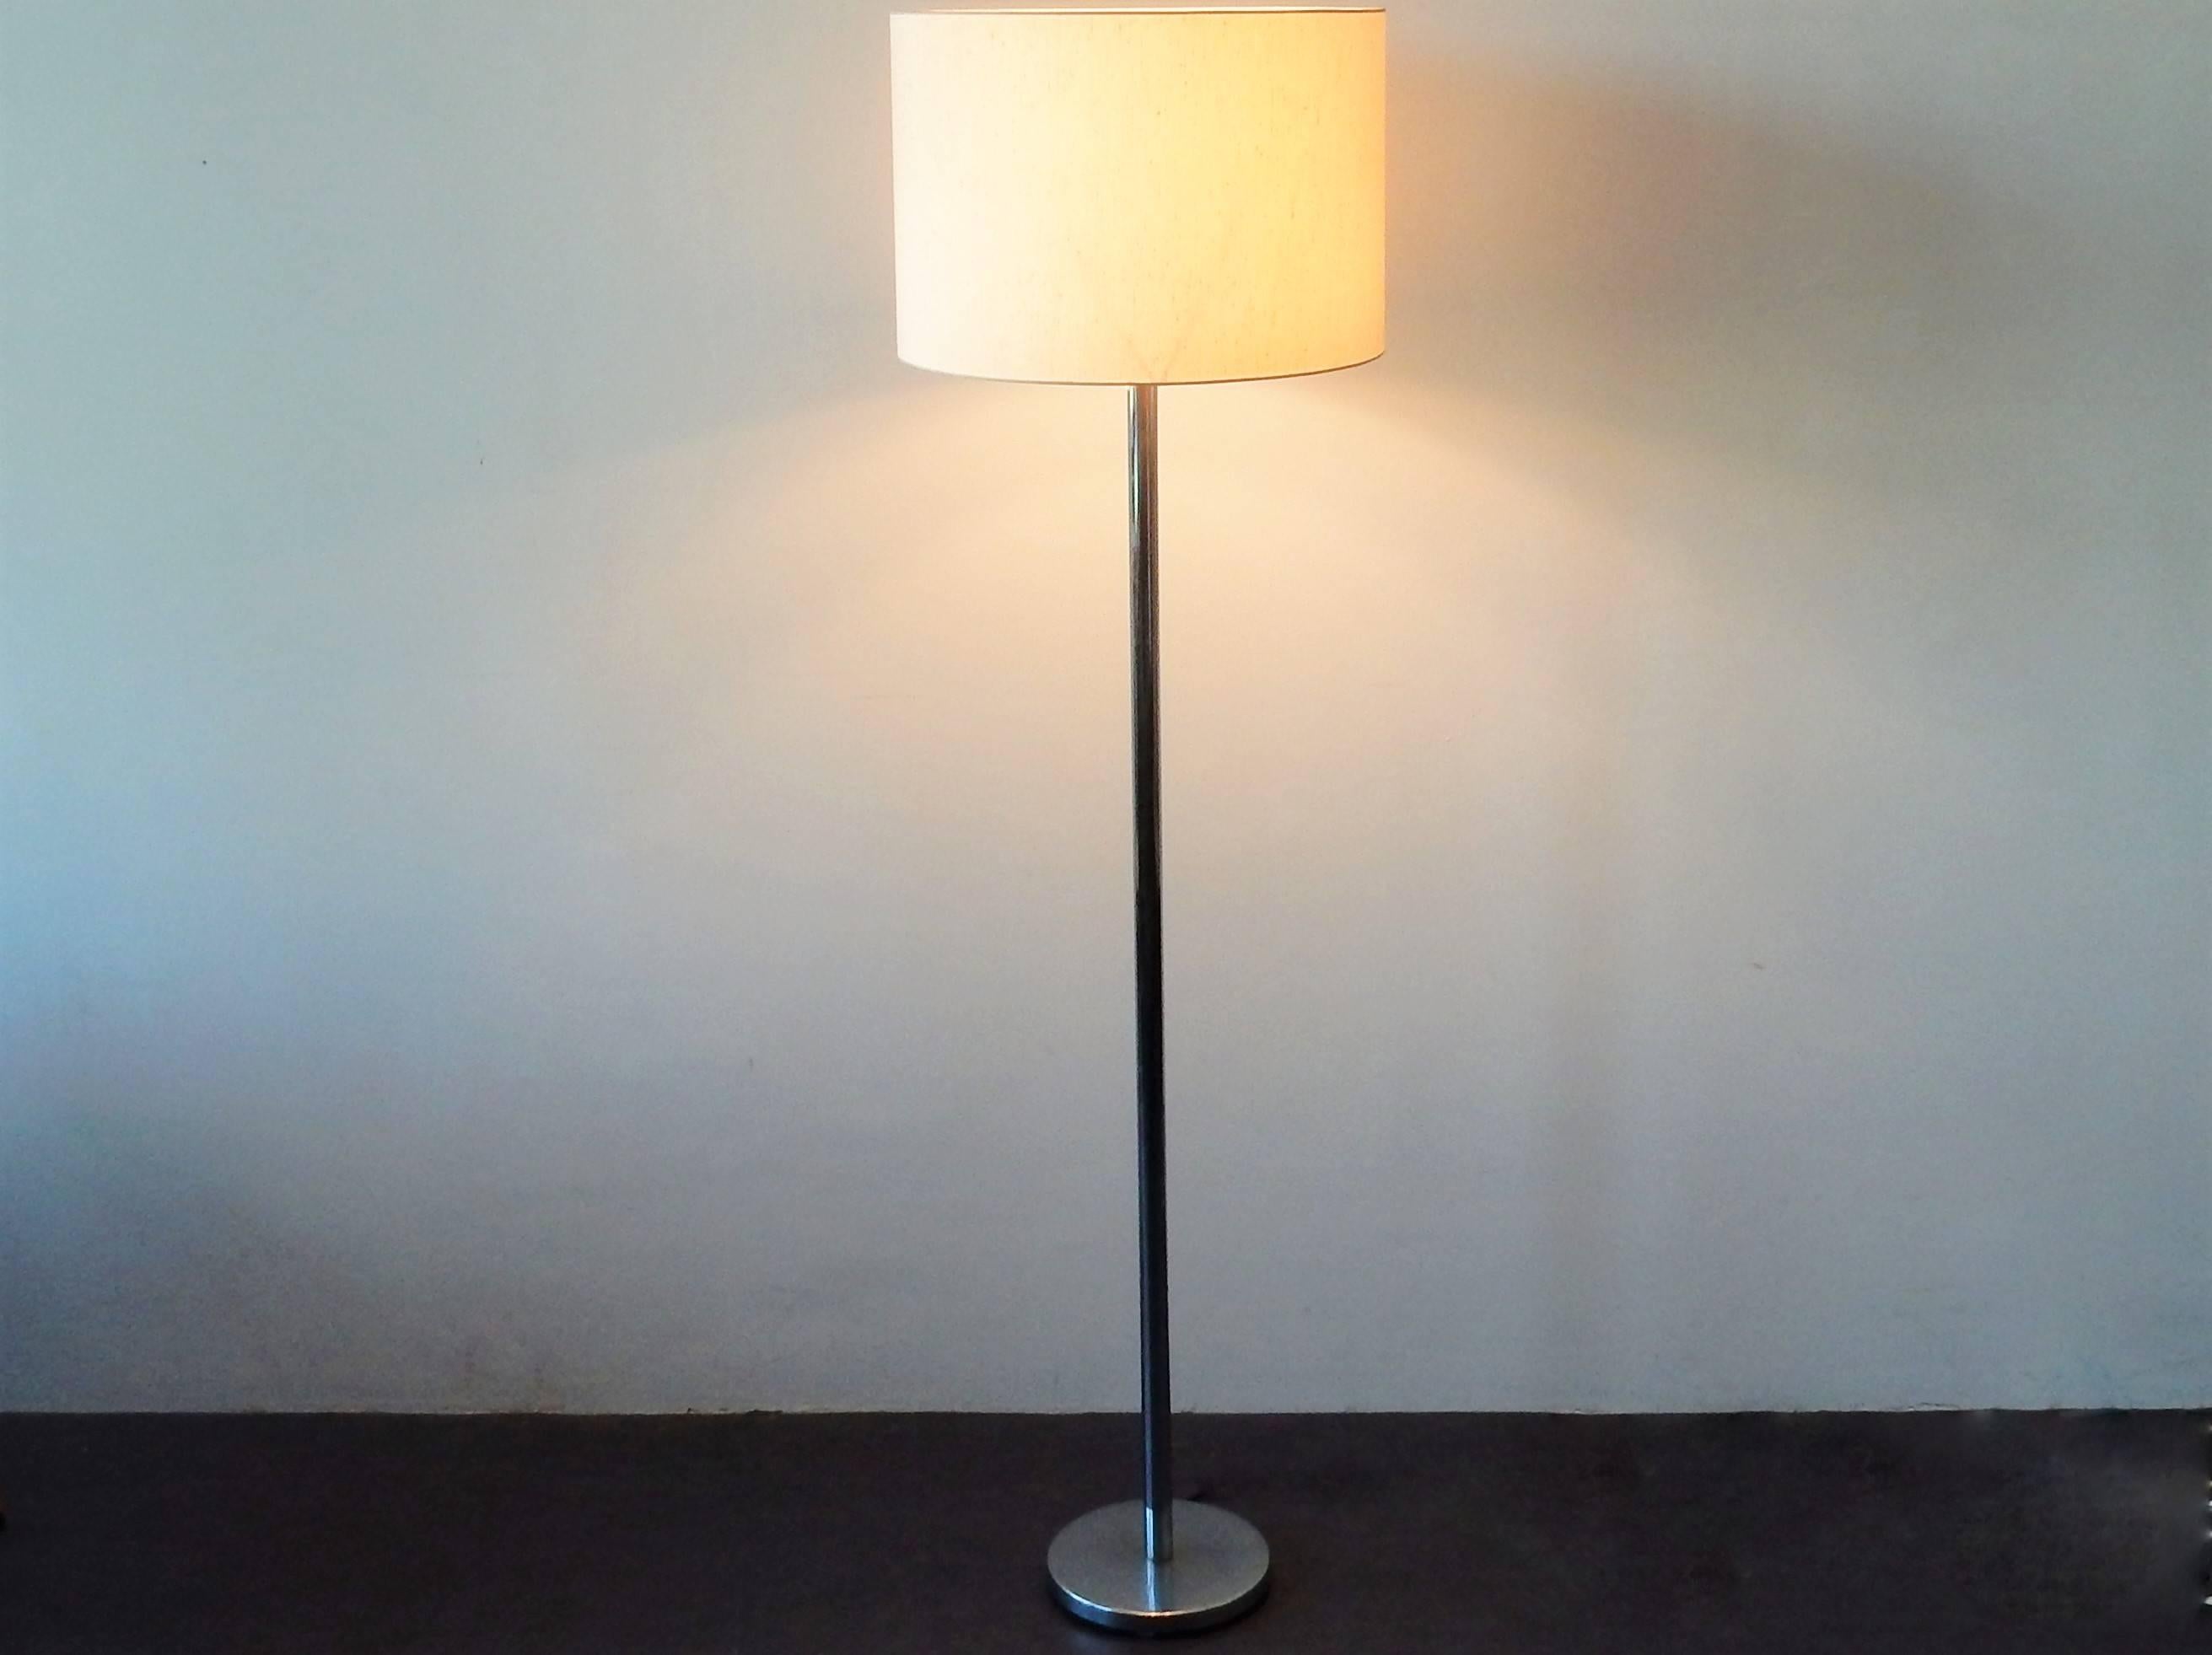 Dutch Big Floor Lamp Model 'Shantung' with Fabric Shade by RAAK, Netherlands, 1970s For Sale